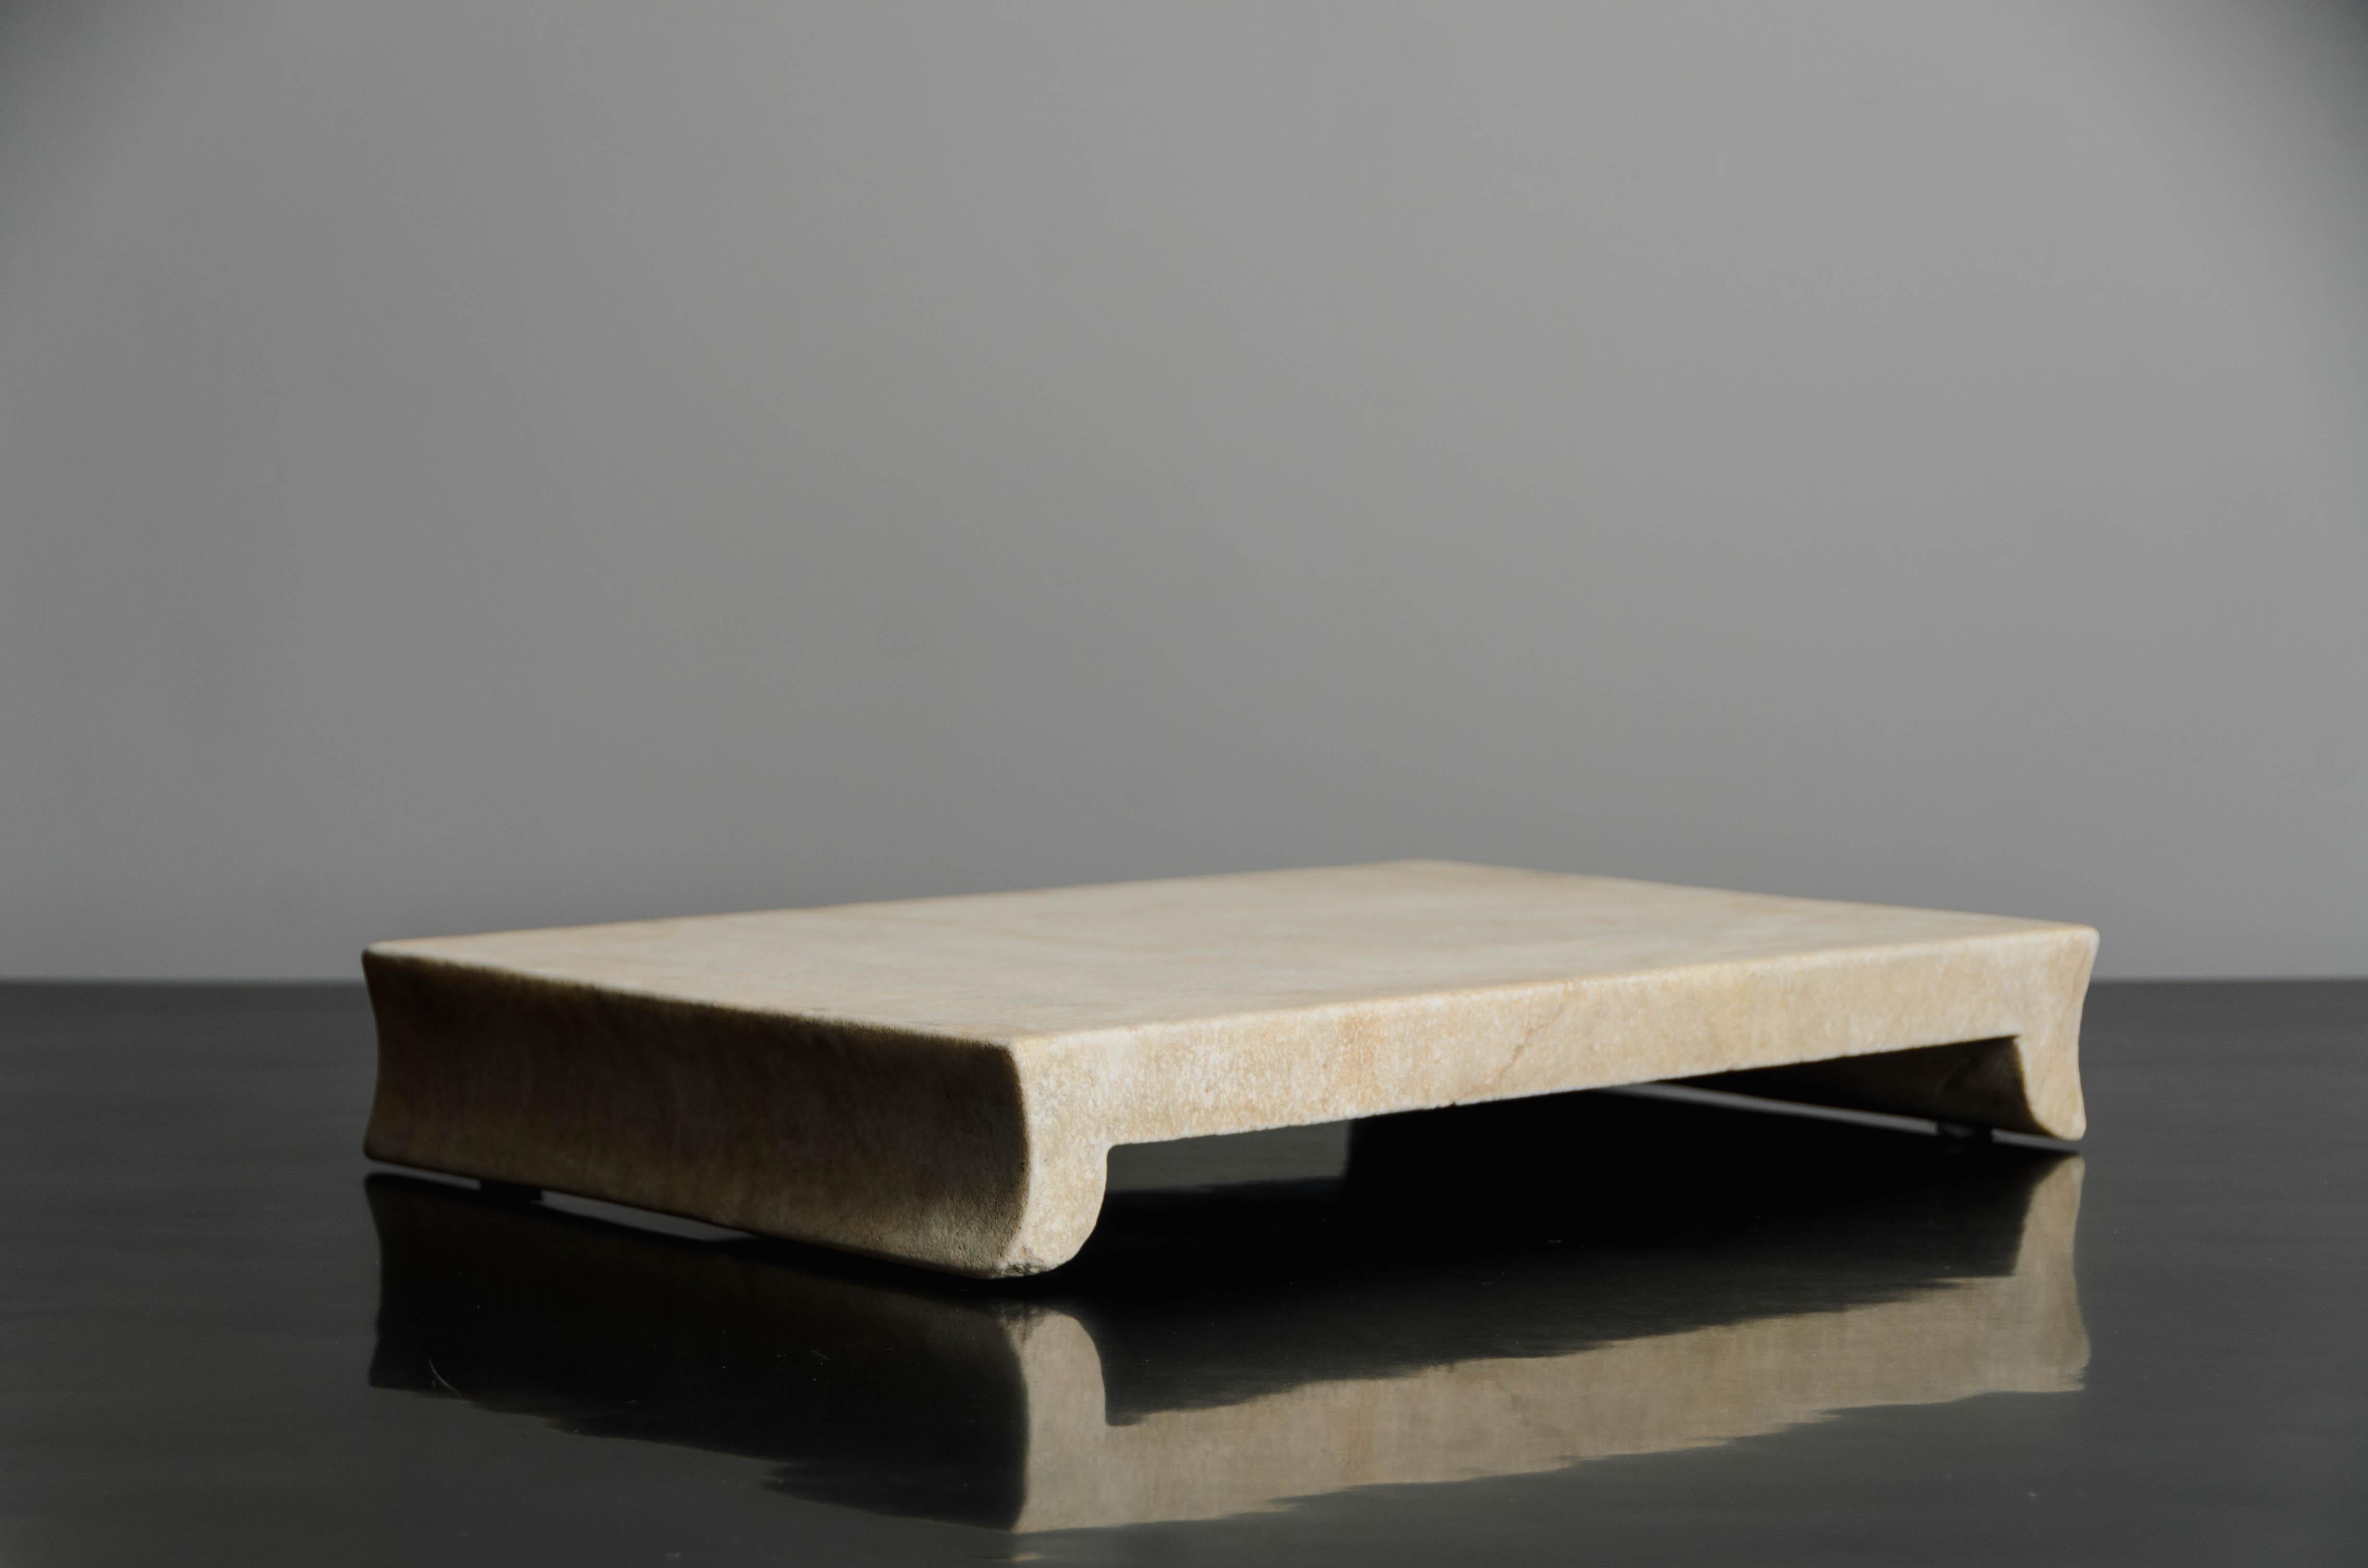 Minimalist Han Bai Yu Stone Elevated Tray by Robert Kuo, Hand Carved, Limited Edition For Sale